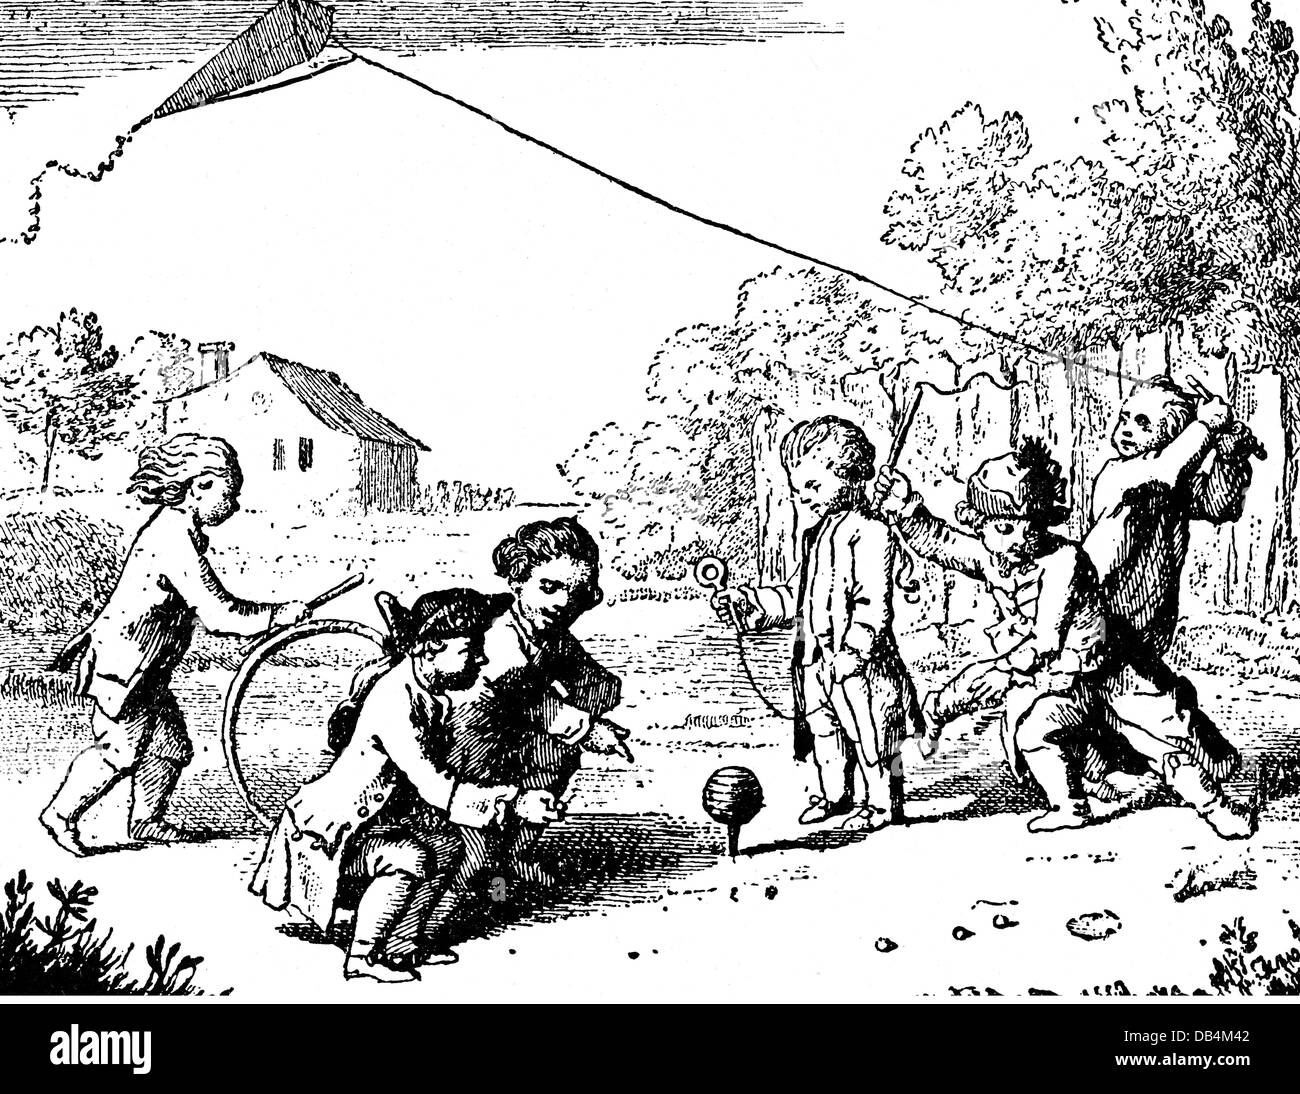 leisure, kiteflying, children with kite, hoop and spinning top outdoors, after drawing, by Daniel Chodowiecki (1726 - 1801) , engraving, by Schleuen, 18th century, 18th century, graphic, graphics, game, games, toy, toys, playing, child's play, kite, kites, hoop, hoops, spinning top, whipping top, whipping tops, humming top, half length, standing, kneel, kneeling, running, run, runs, historic, historical, child, children, male, boy, boys, people, Additional-Rights-Clearences-Not Available Stock Photo